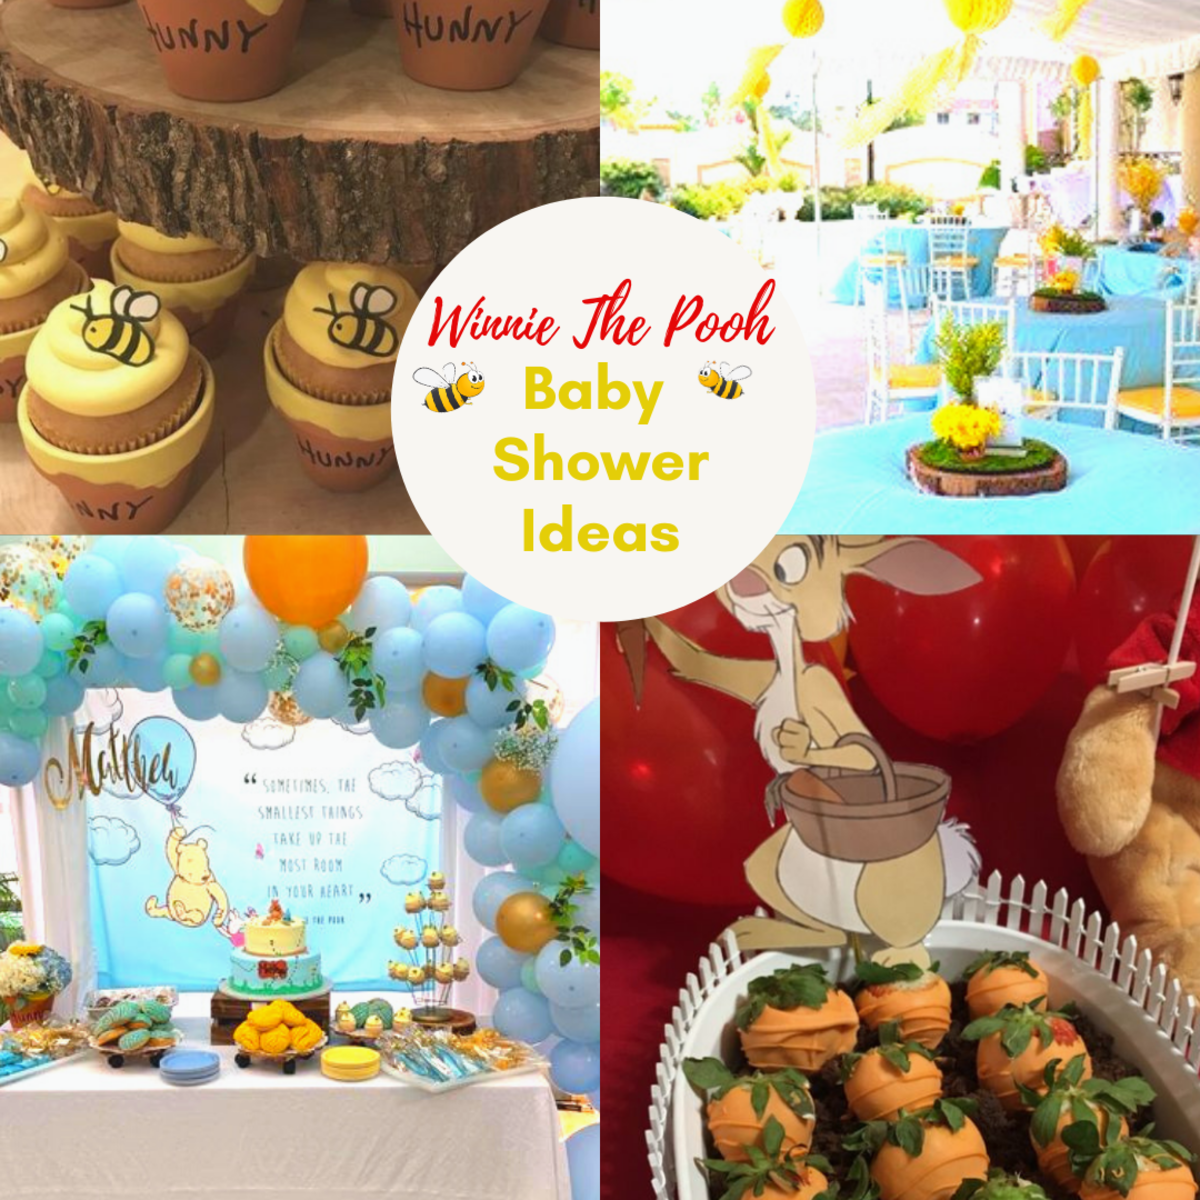 30 + Winnie the Pooh Baby Shower Ideas that are so cute